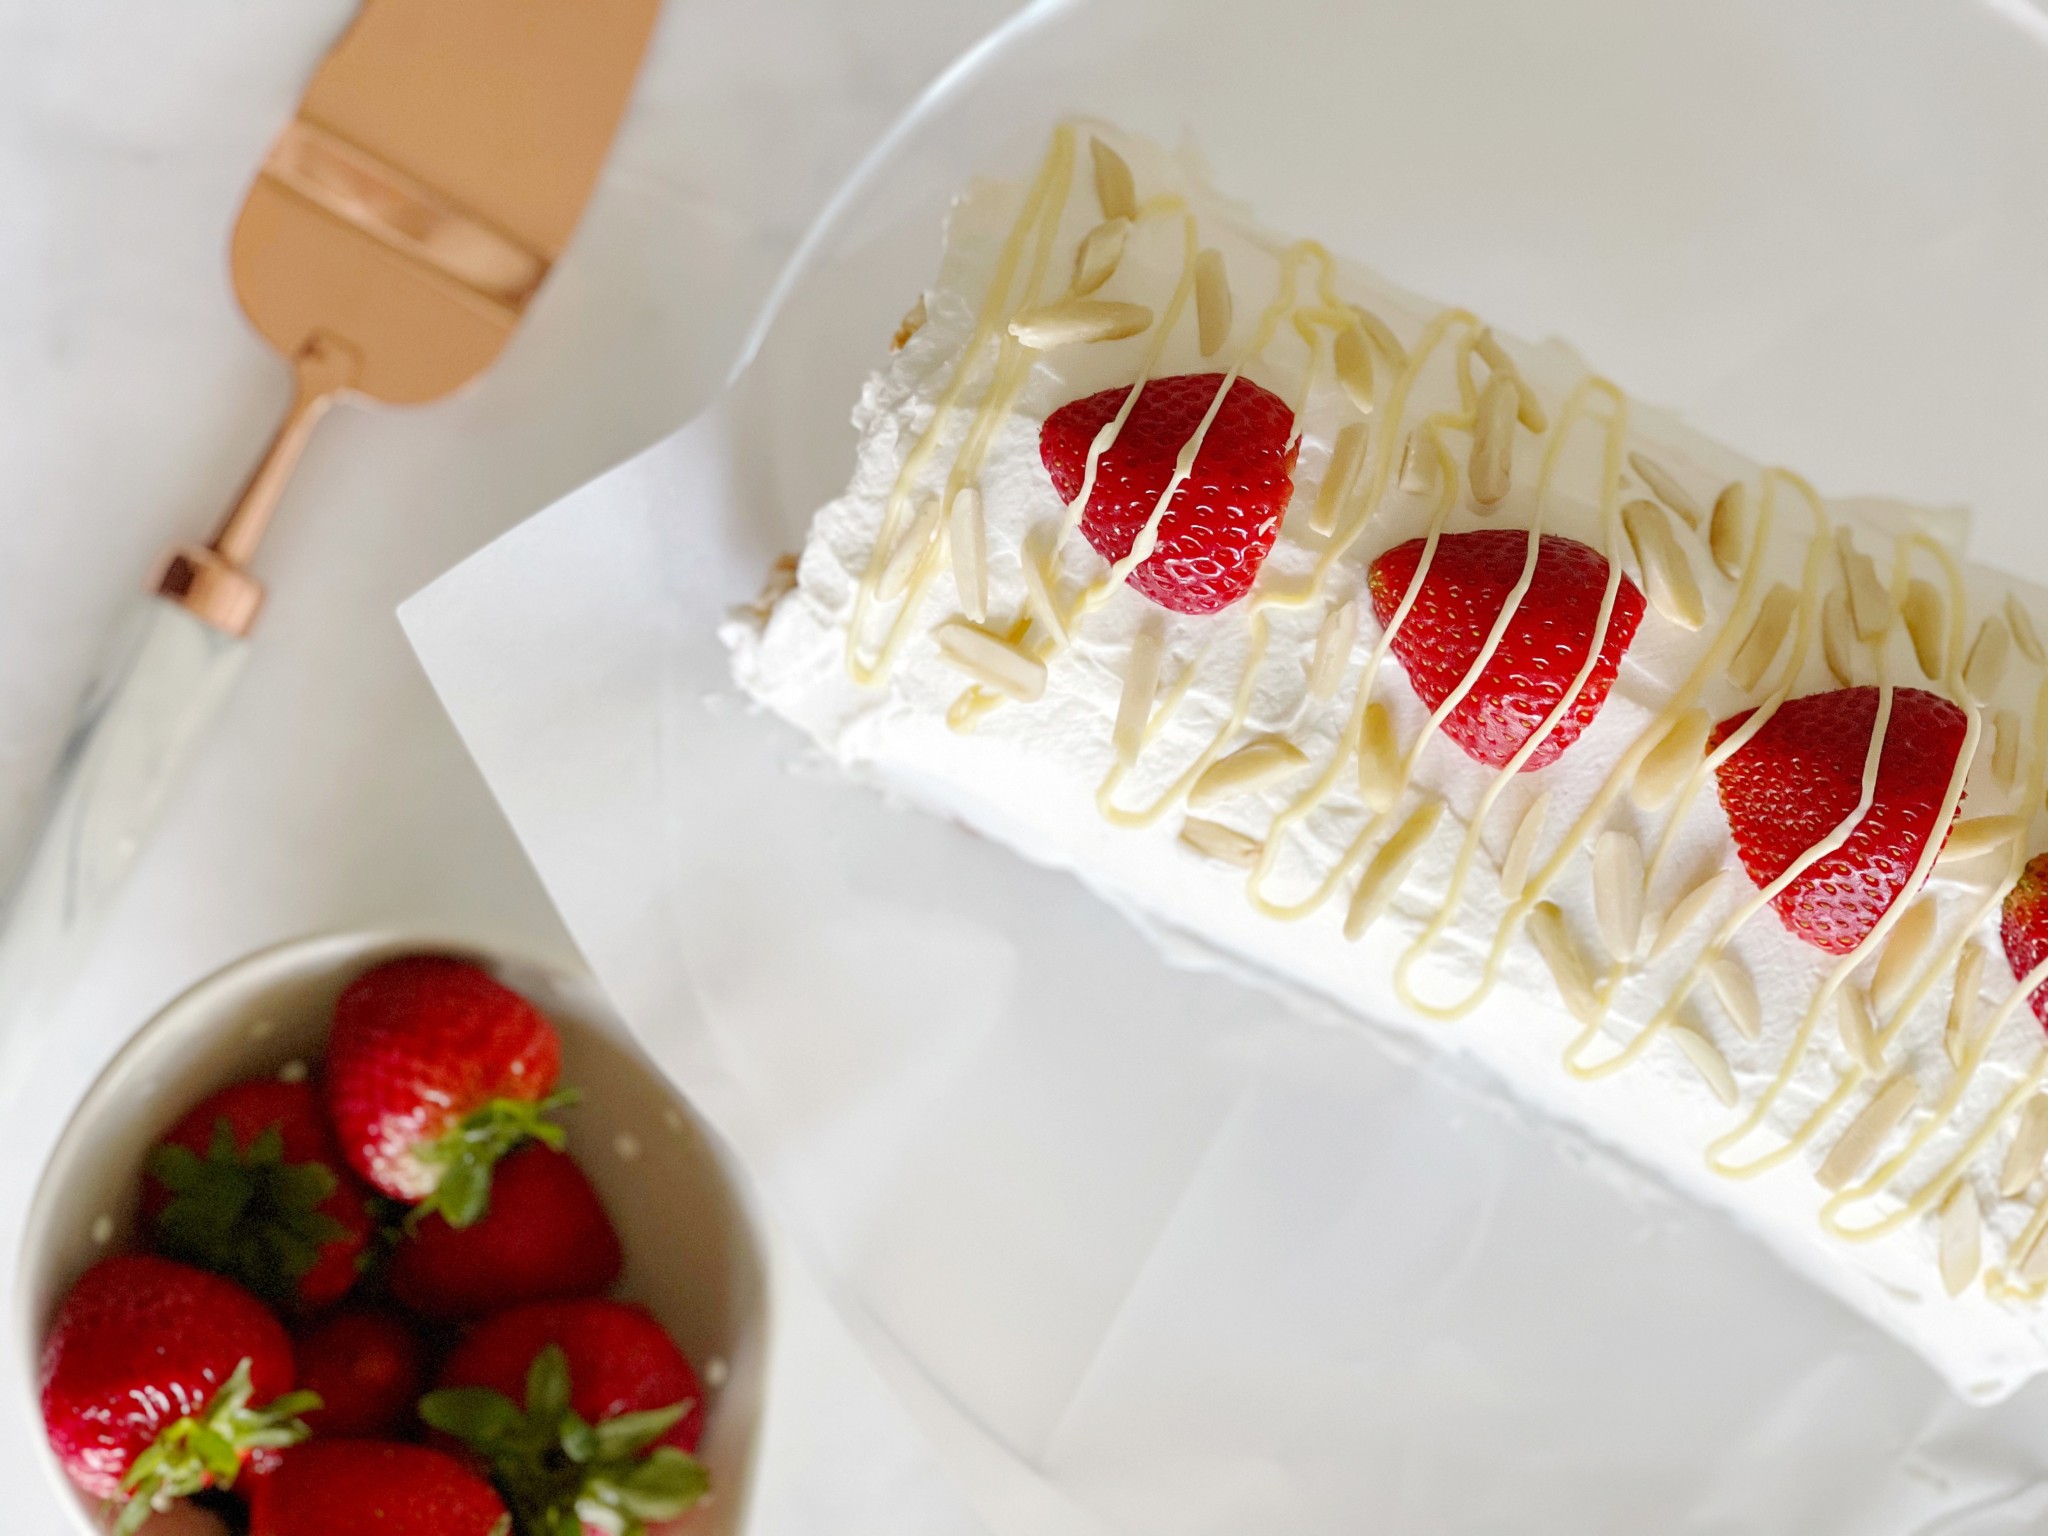 Top of the swiss roll cake image